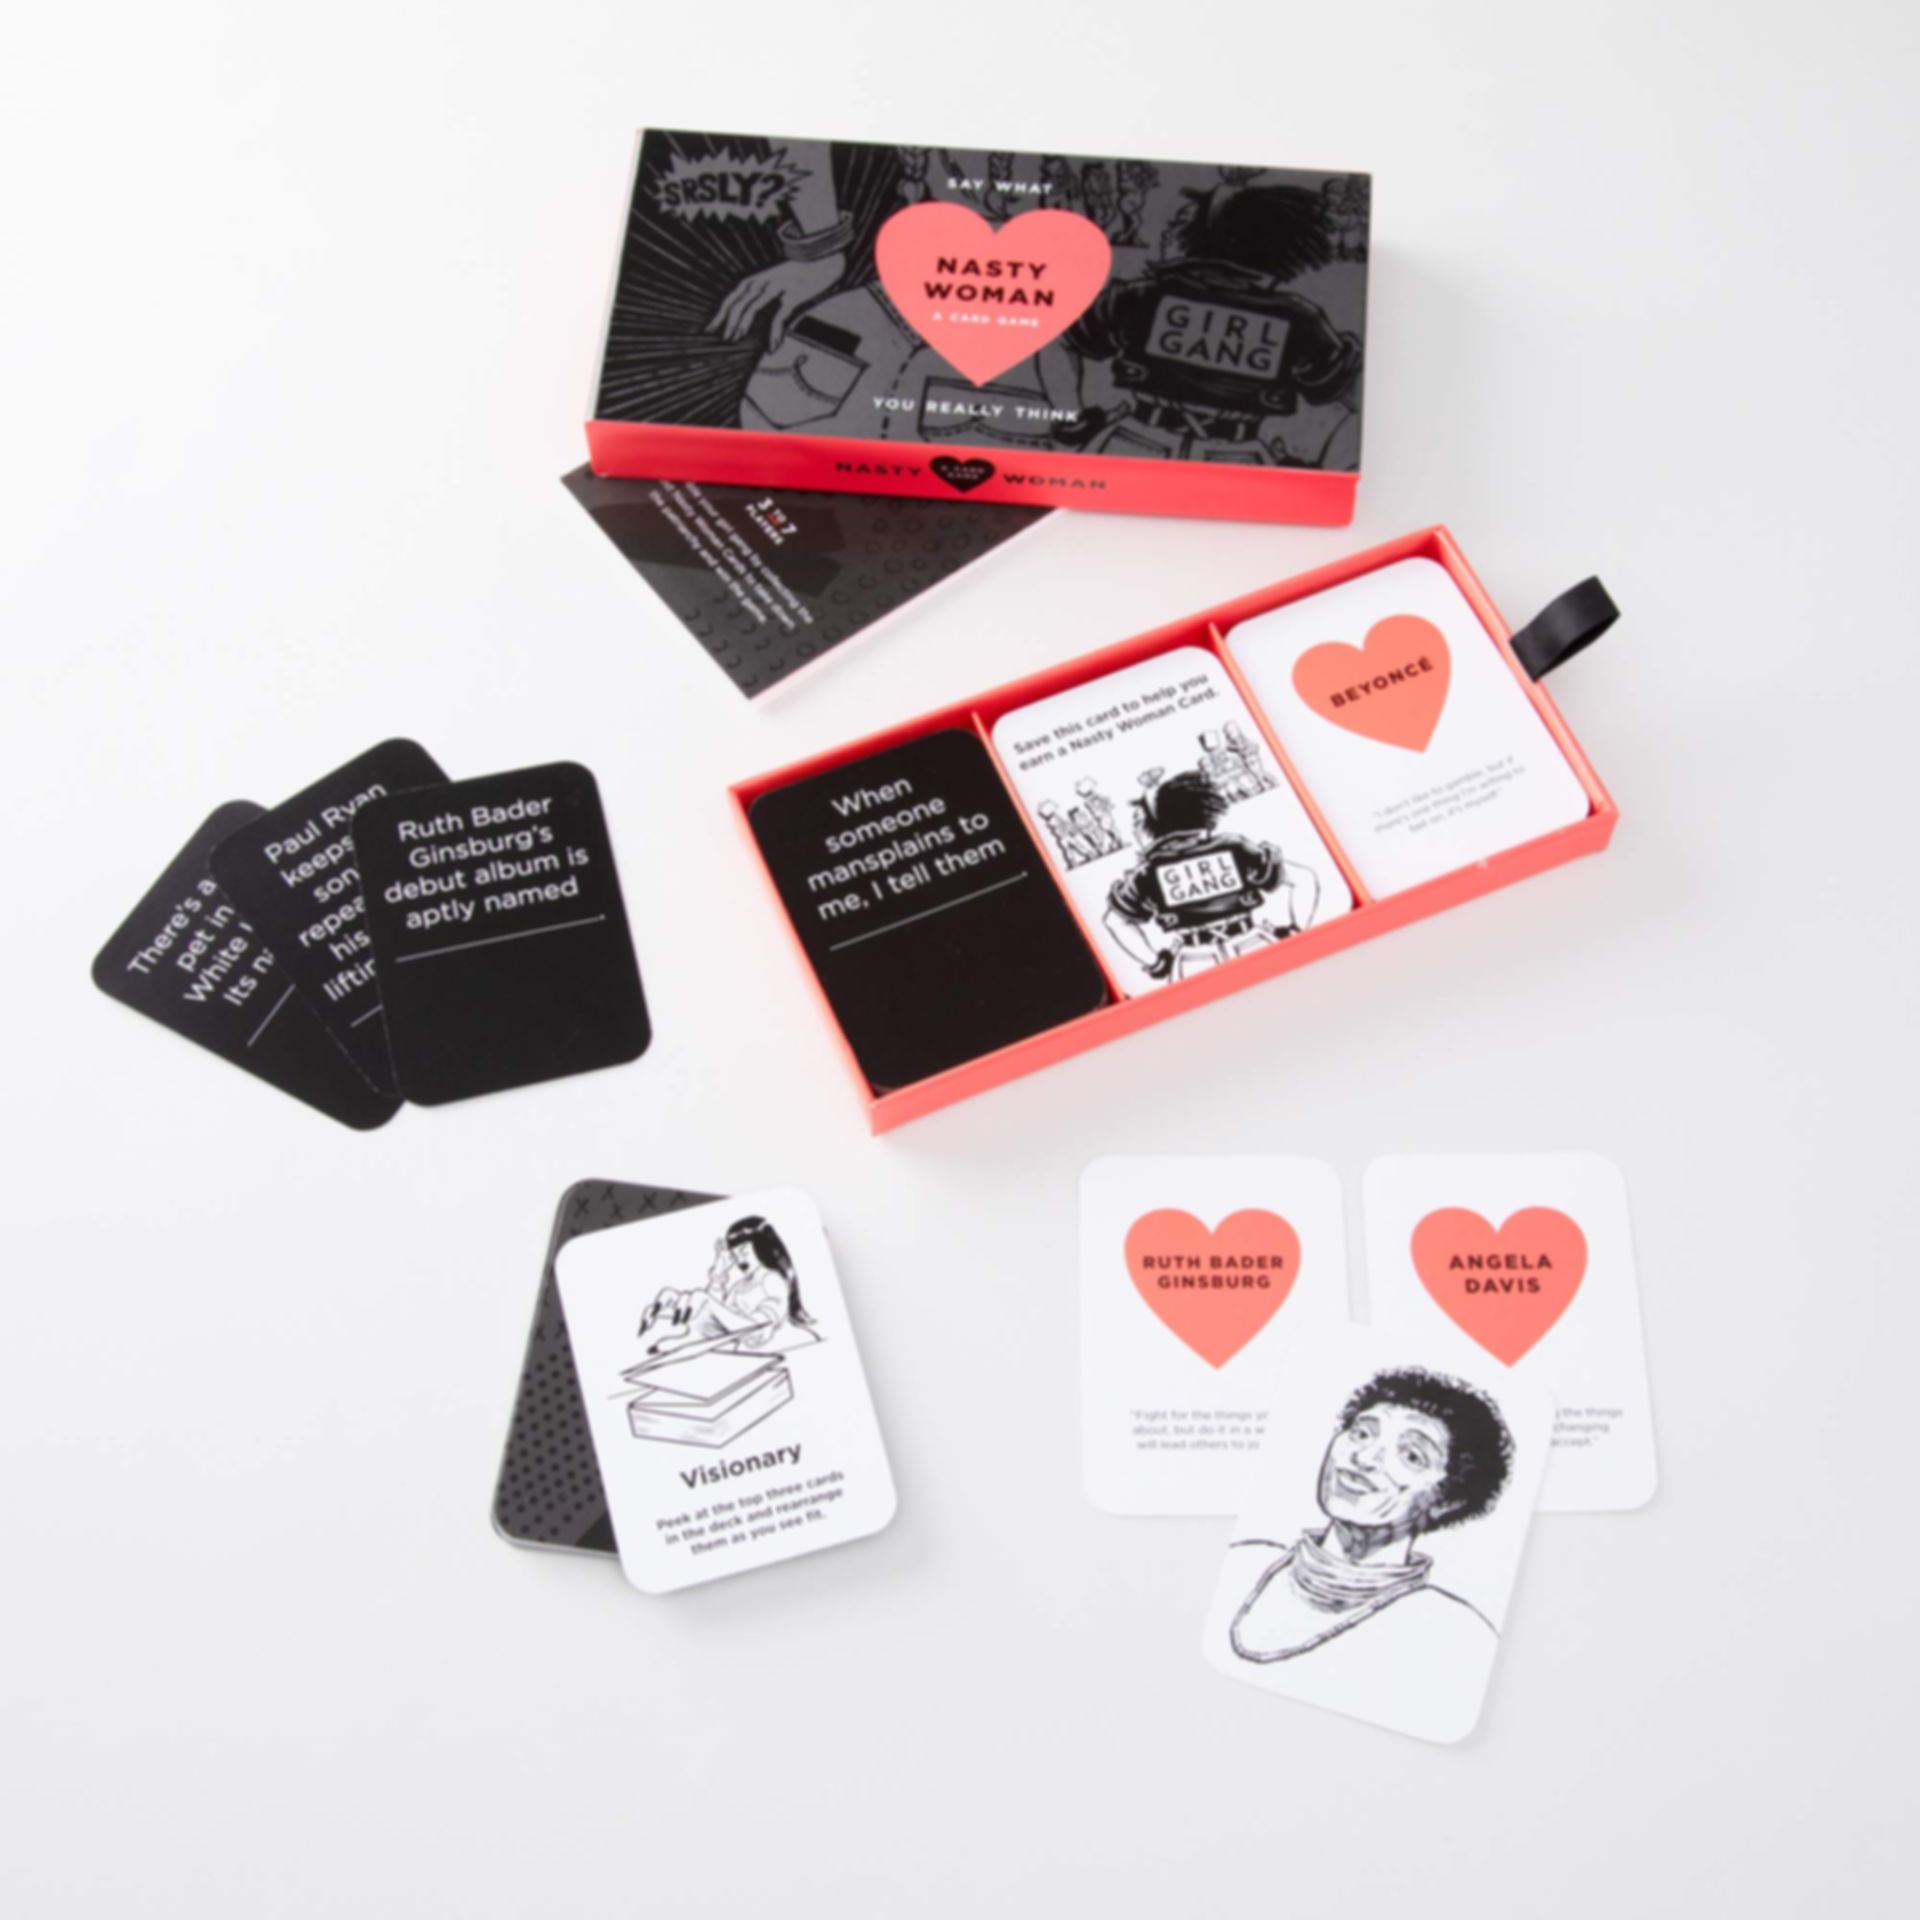 The Nasty Woman Game: A Card Game for Every Feminist komponenten